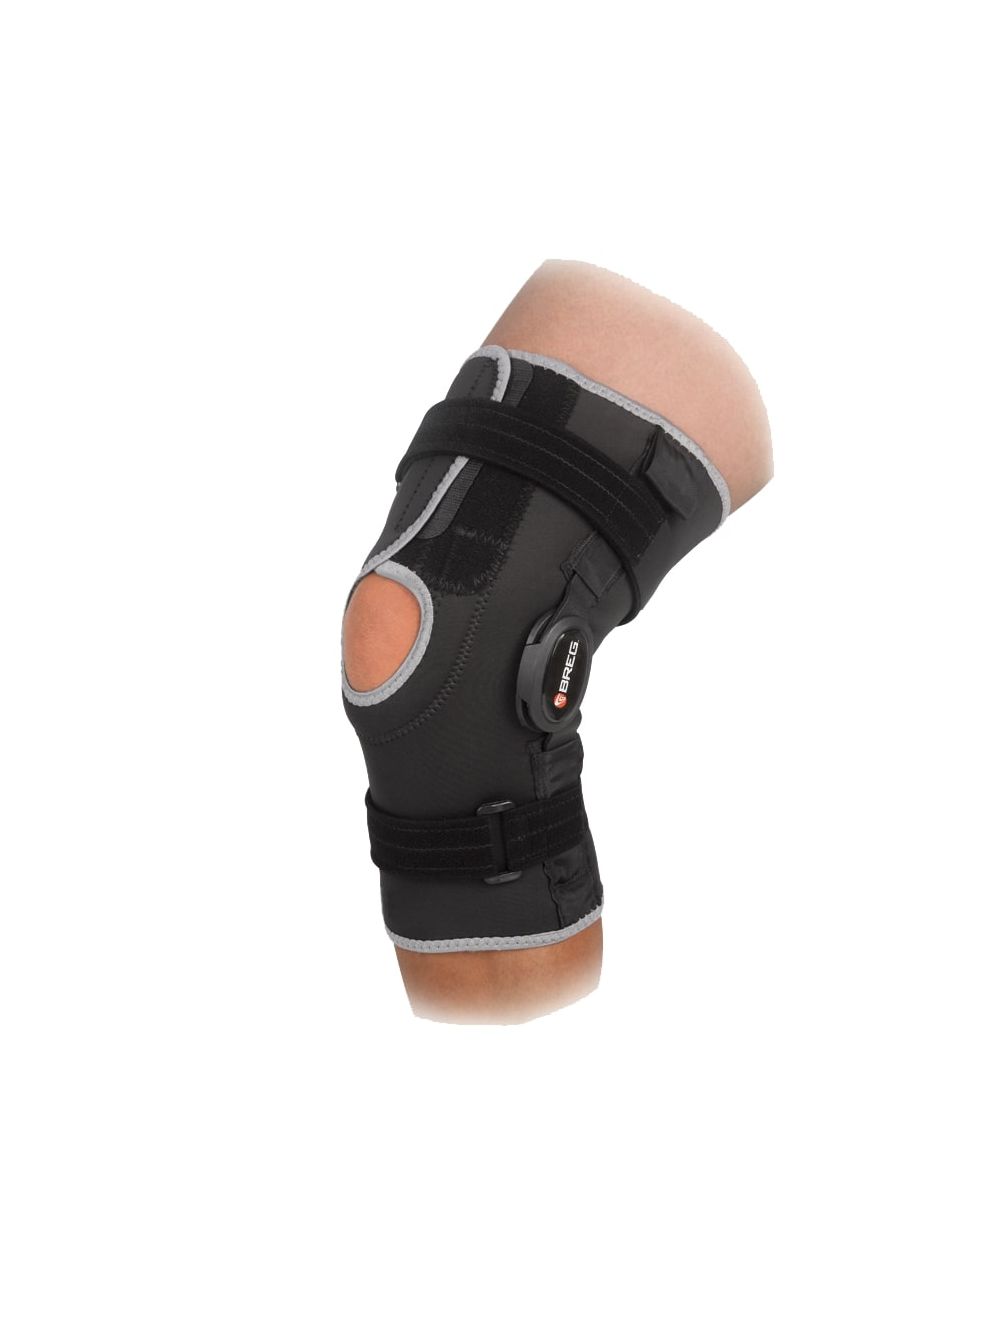 California Medical Supply Company Breg Crossover Knee Brace AAA Medical  Supply In San Diego